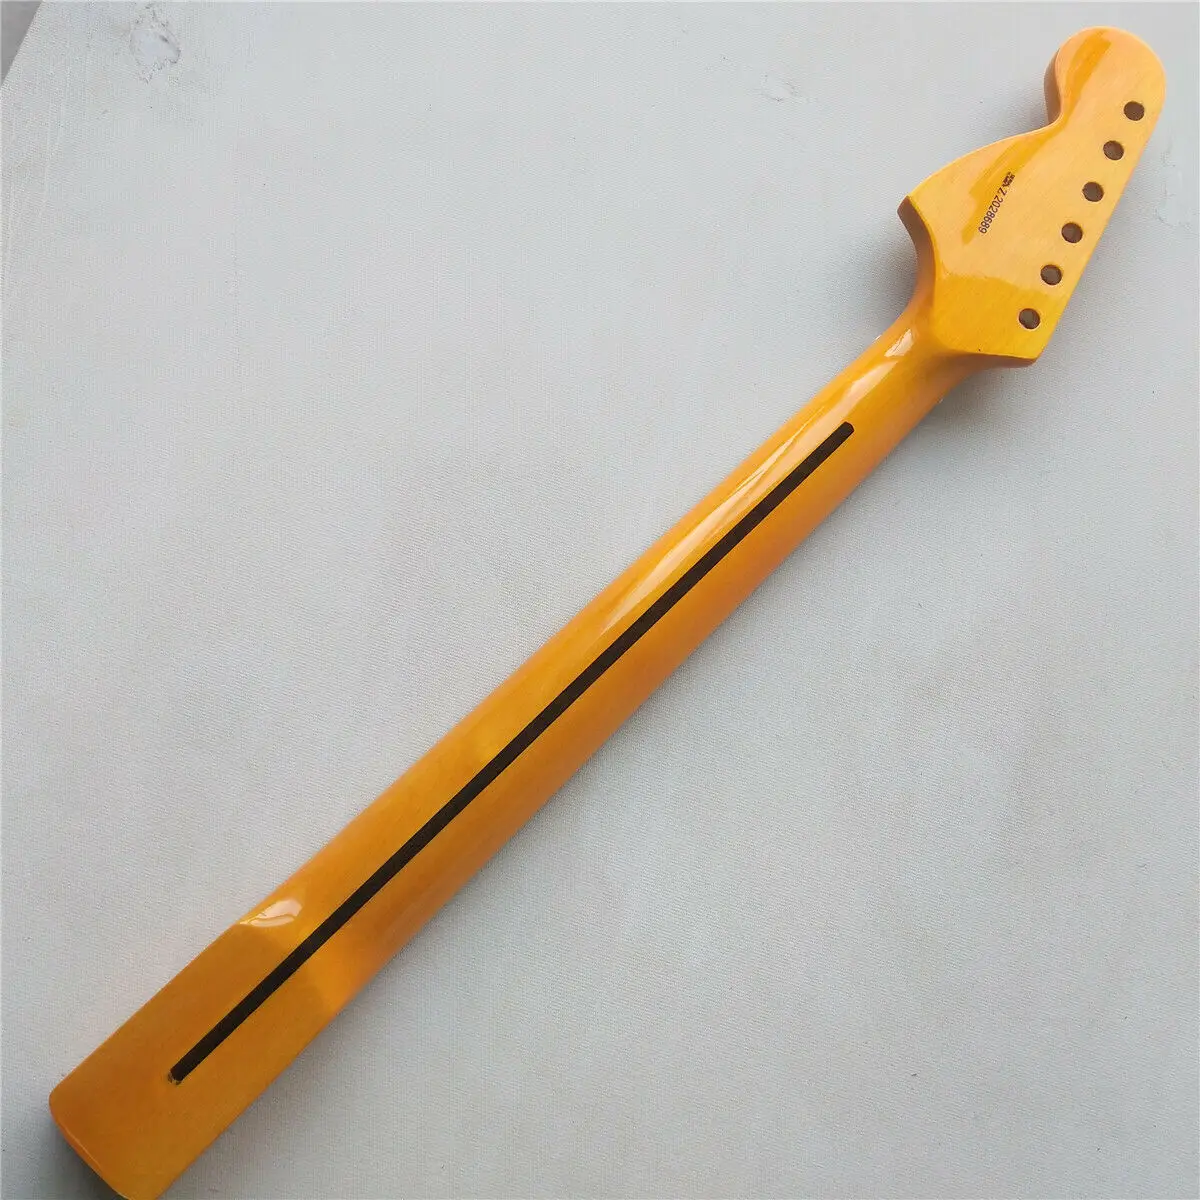 22 fret 25.5 inch Big head Guitar neck Maple Fingerboard Classic dot Inlay Yellow New Replacement 1set enlarge